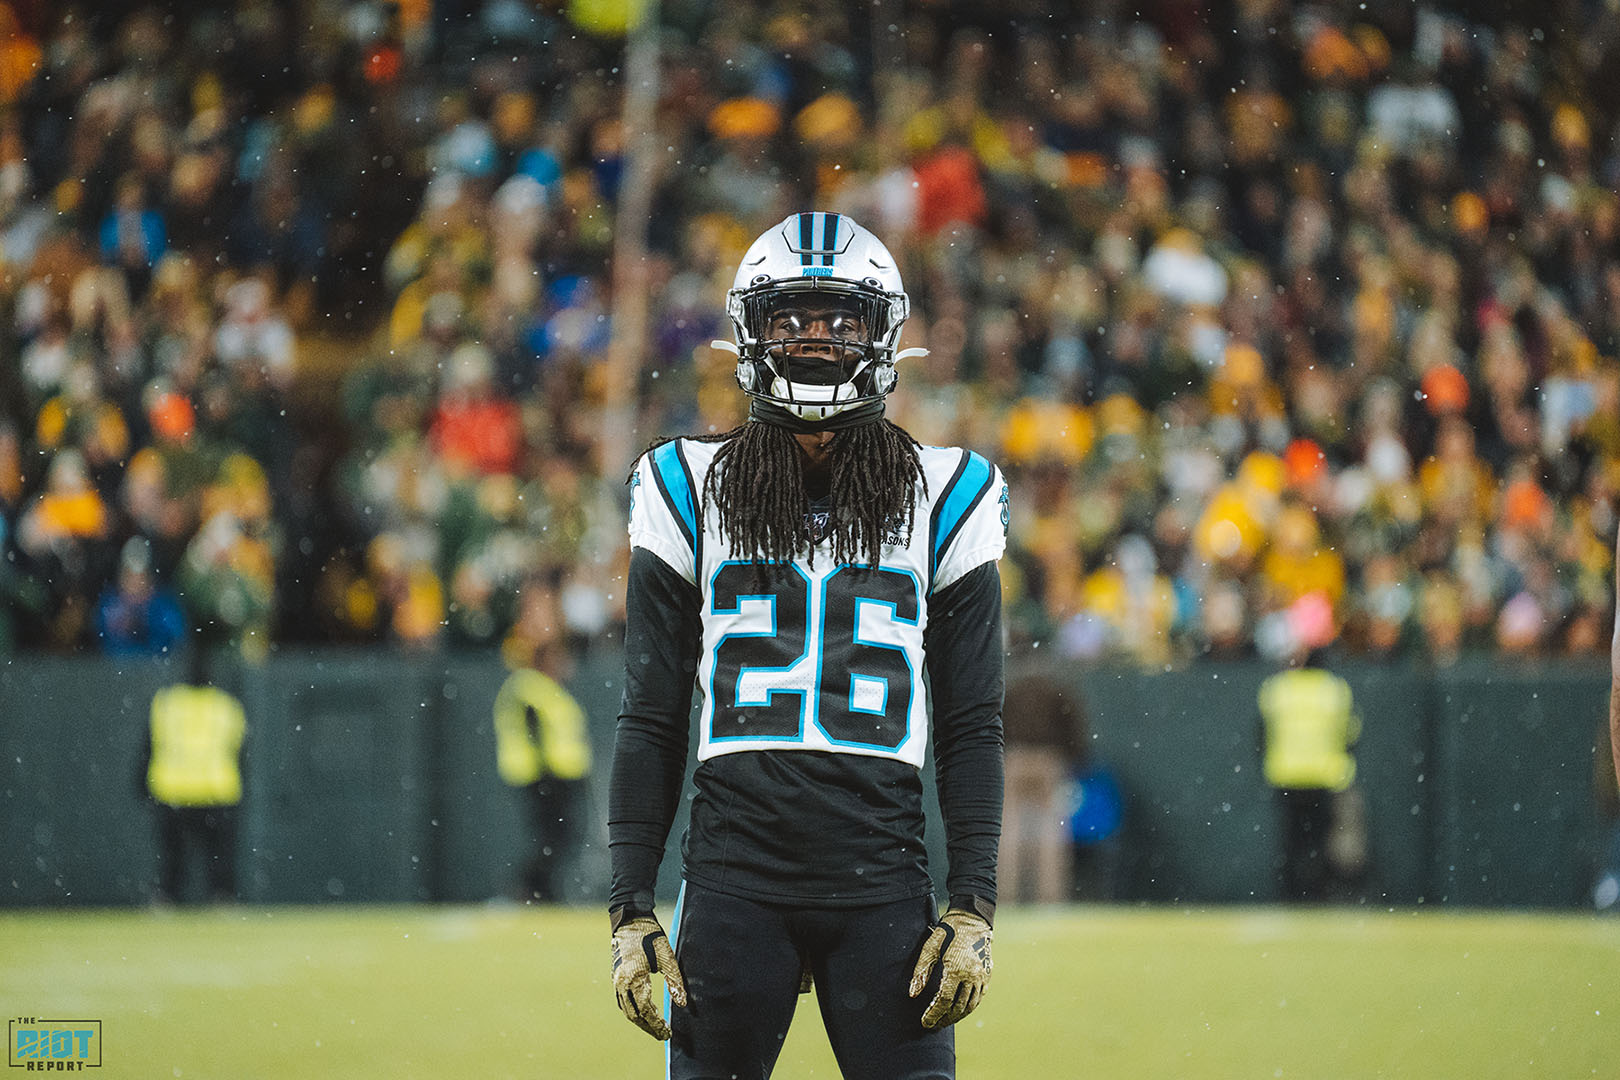 Panthers Friday Injury Report: Donte Jackson Questionable, Daley Doubtful